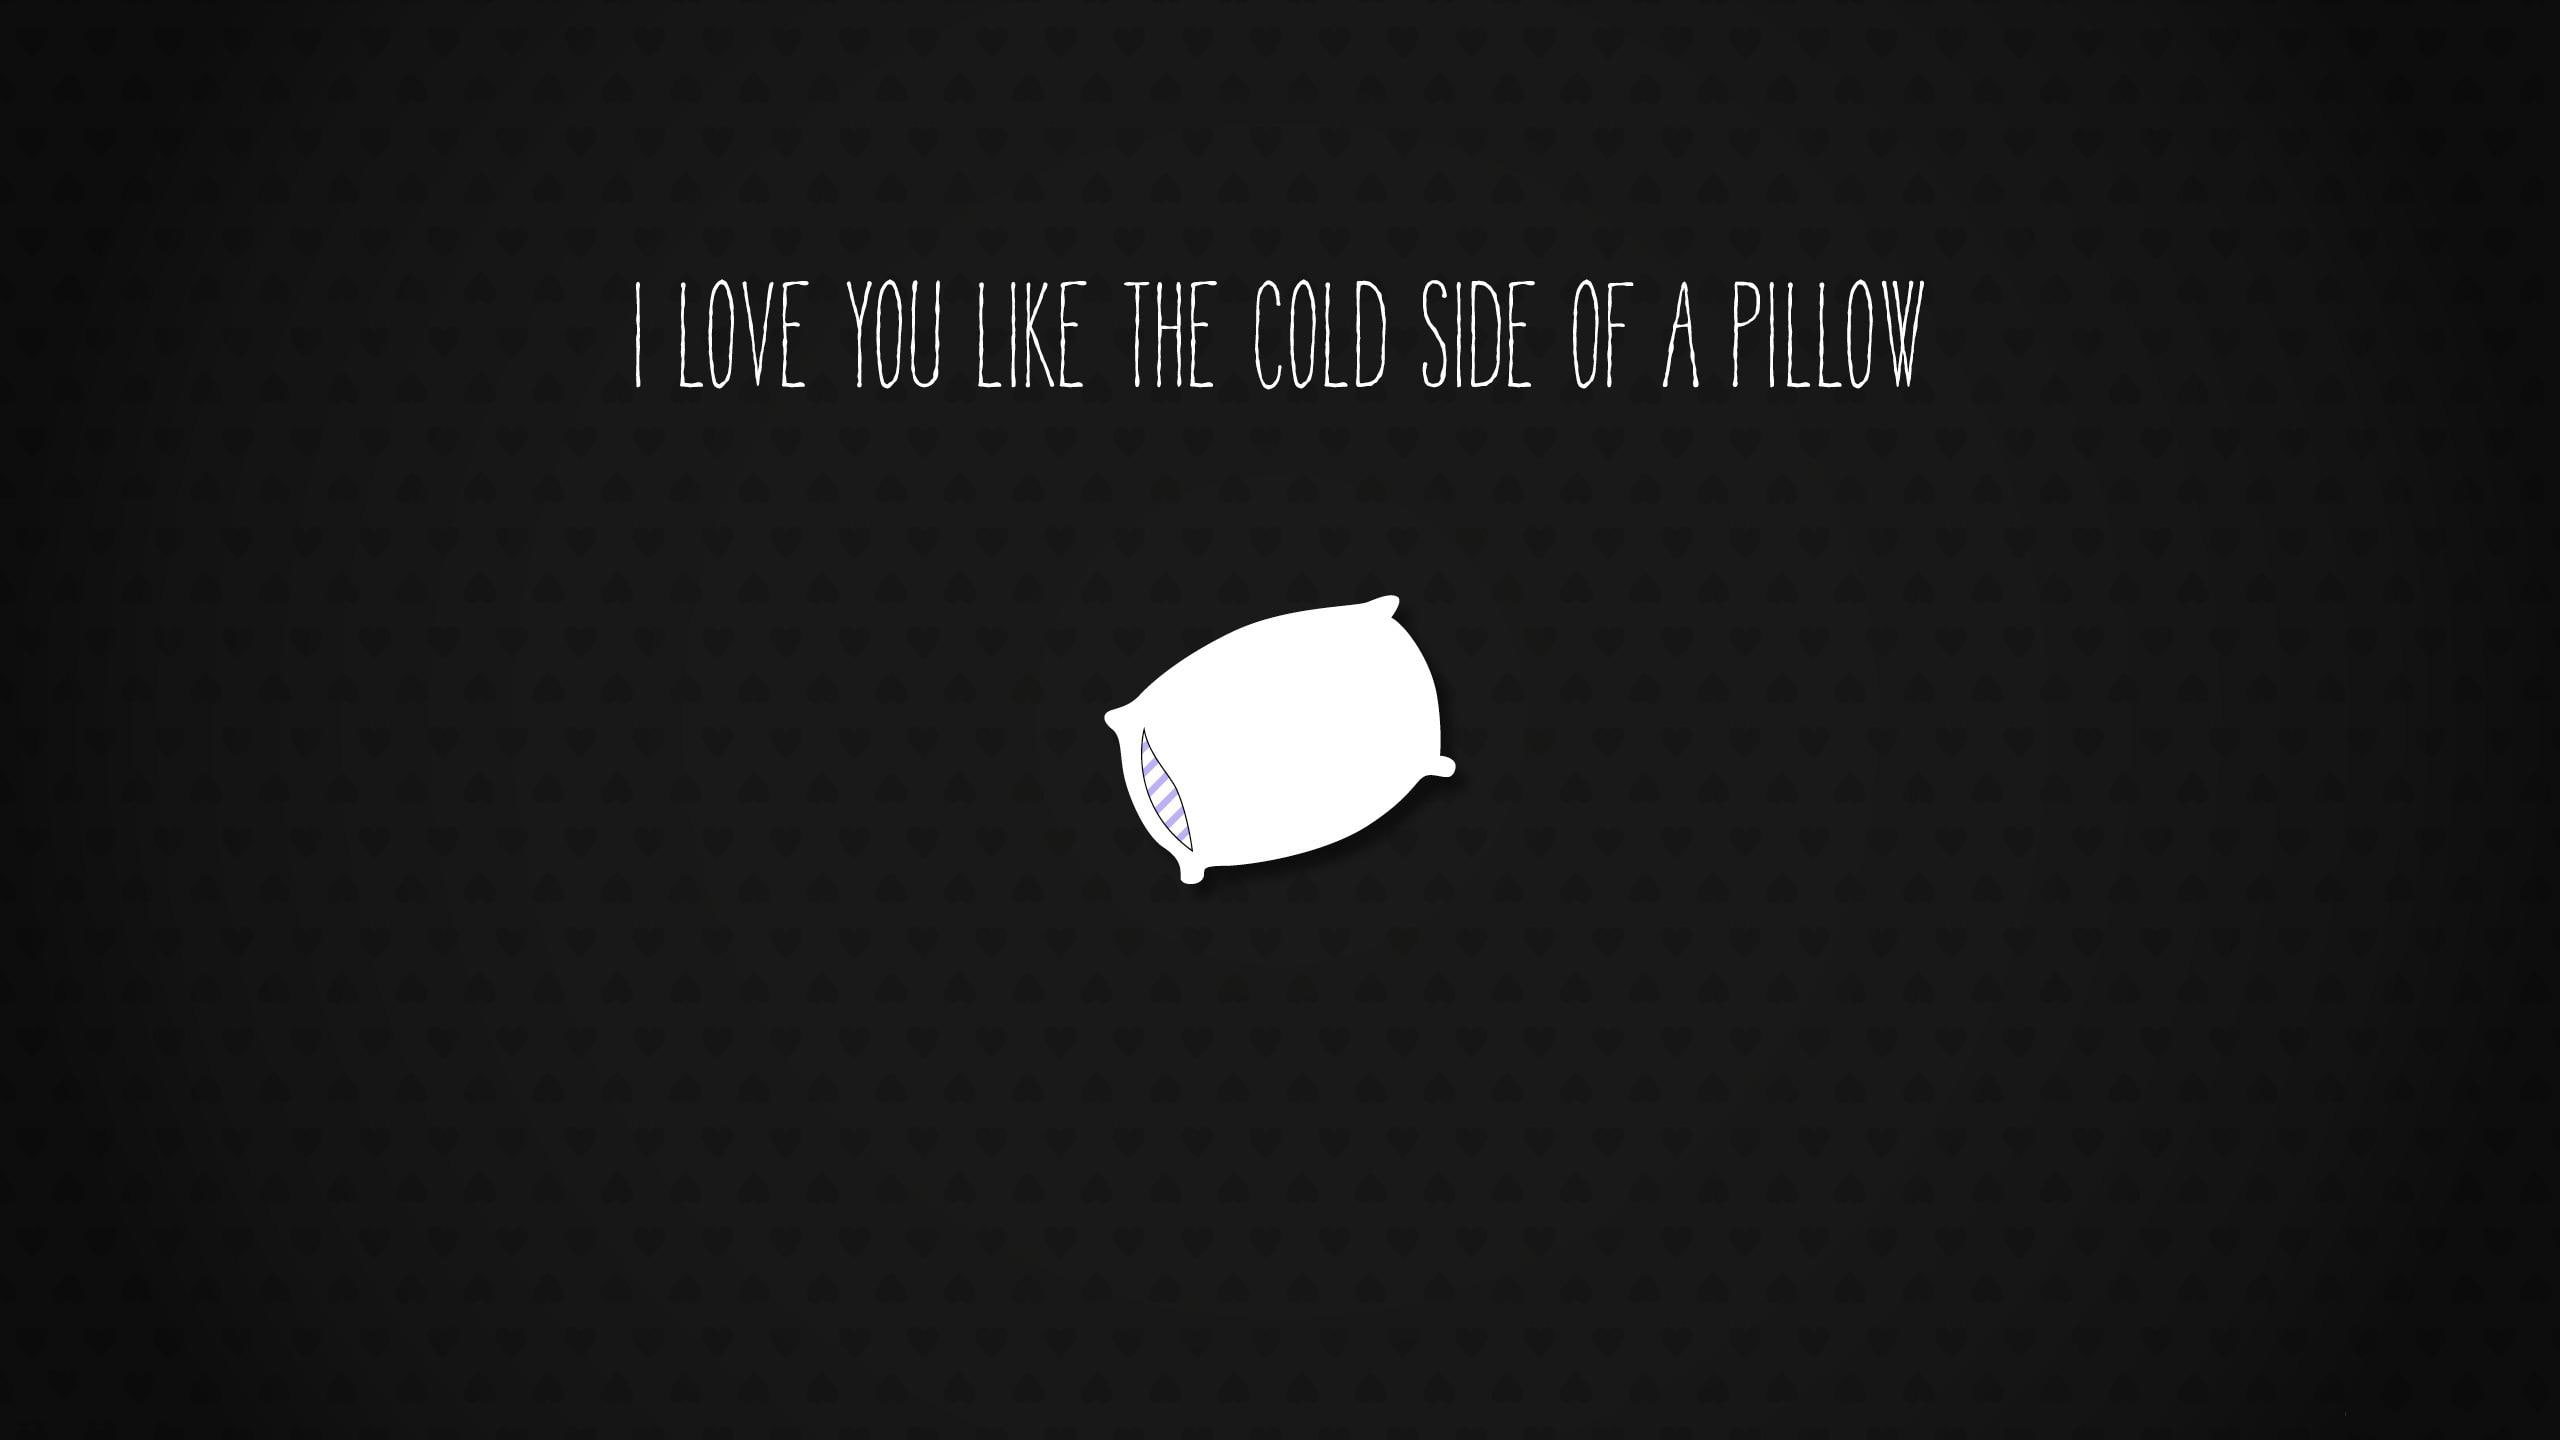 Pillow, black and white pillow illustration, quotes, 2560x1440